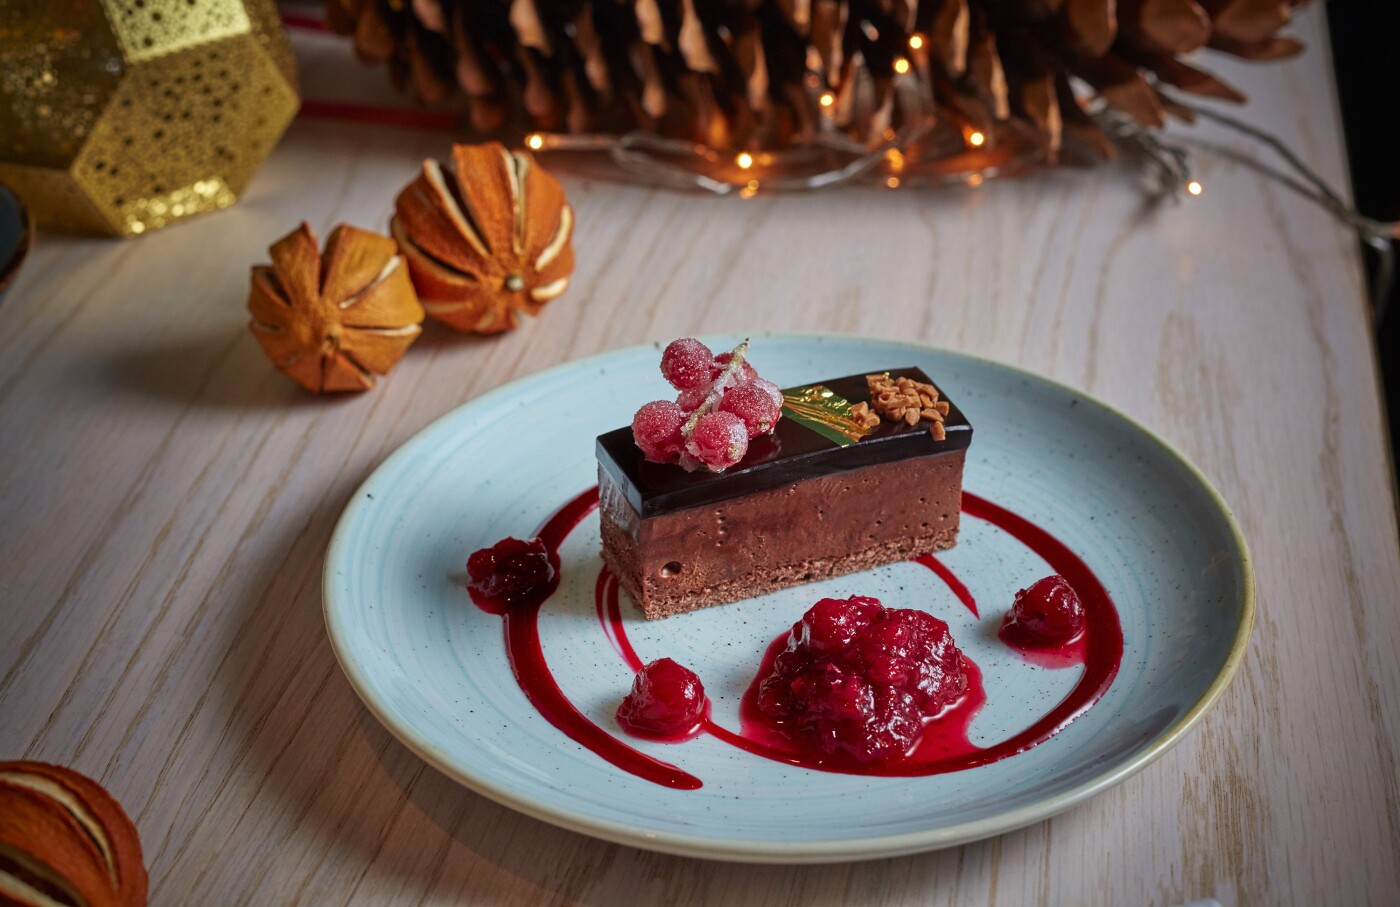 Chocolate on chocolate with sugared berries and compote - lovely velvety textures added to a lovely Christmas setting.<br />
<br />
Taken at Bronte Restaurant, The Strand @bronte_london<br />
Photographer: @jodihindsphoto